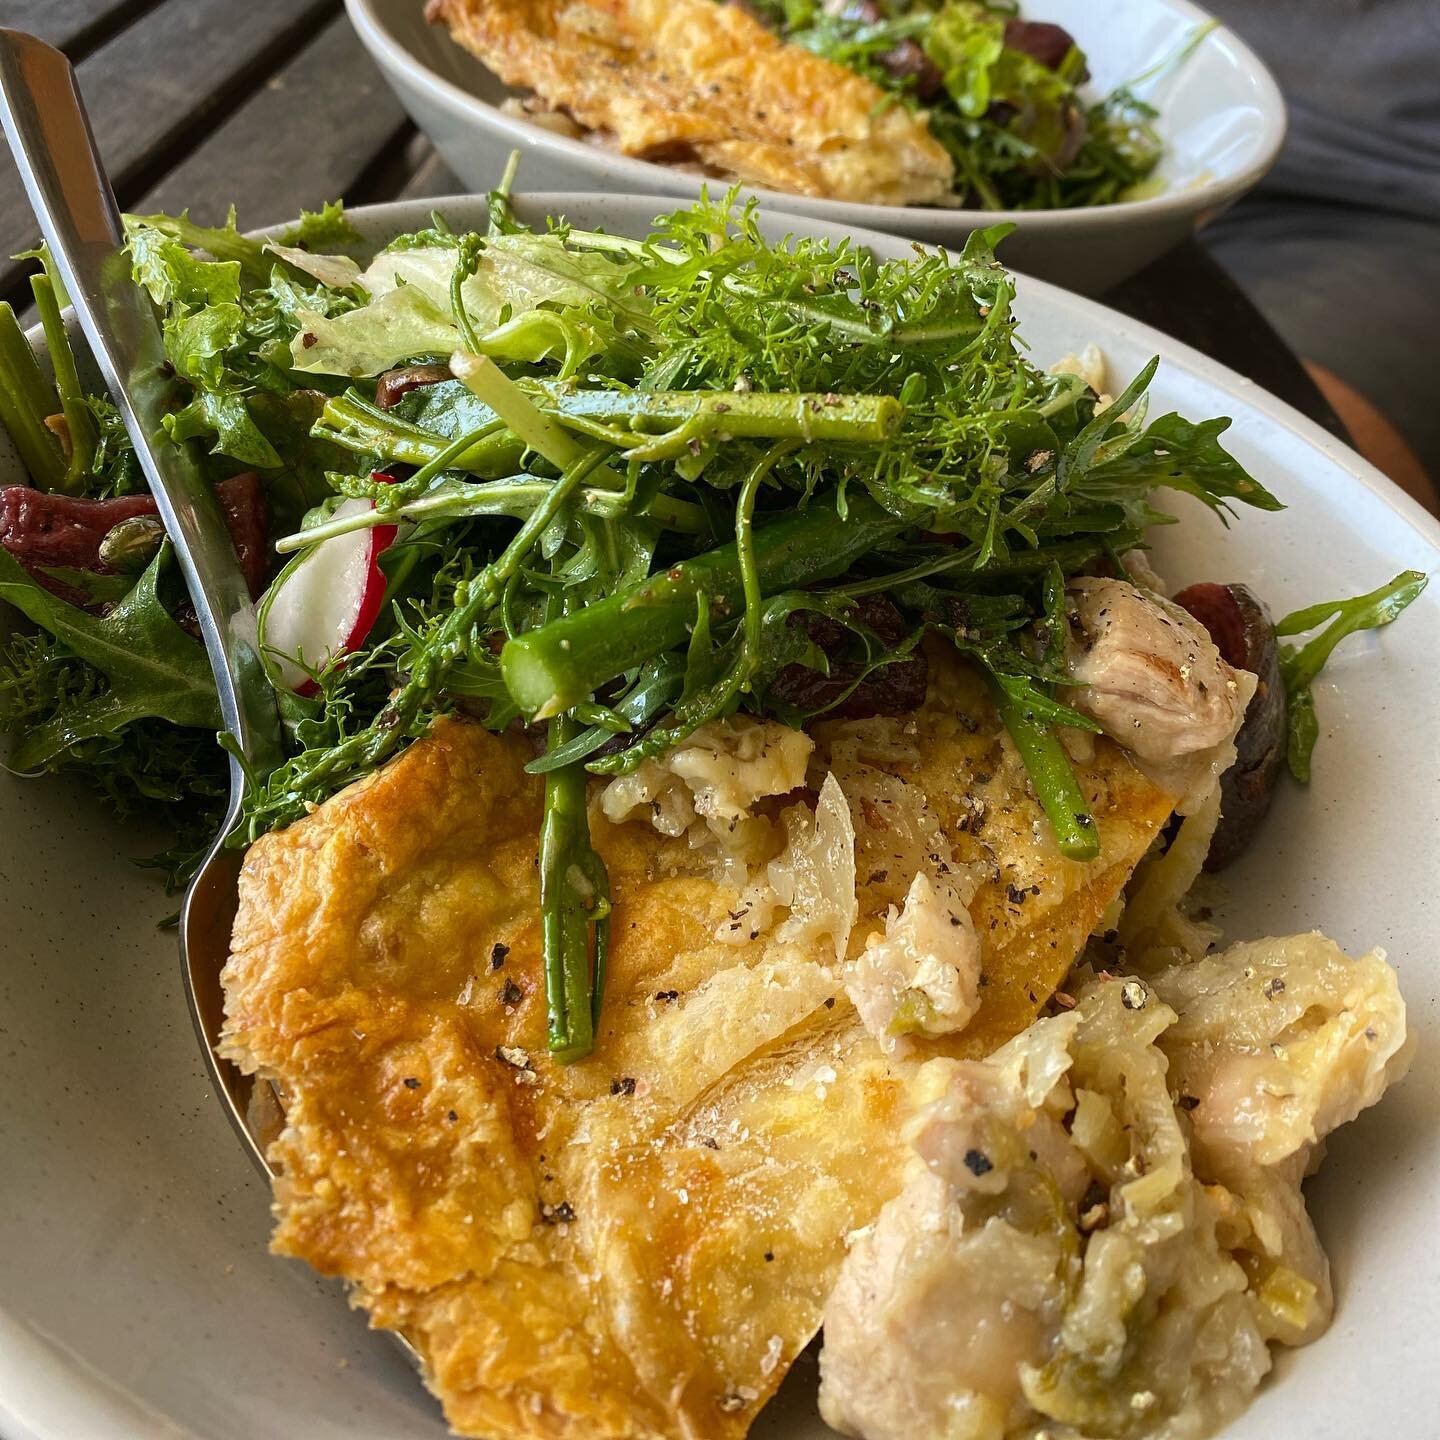 Simple farm lunch. Last night&rsquo;s chicken, fennel, mushroom, leek pie. Basic throw together salad full of our farm goodies including our zesty and peppery mix, few leaves of lettuce, roasted beets (so handy having pre made veg ready to throw in s